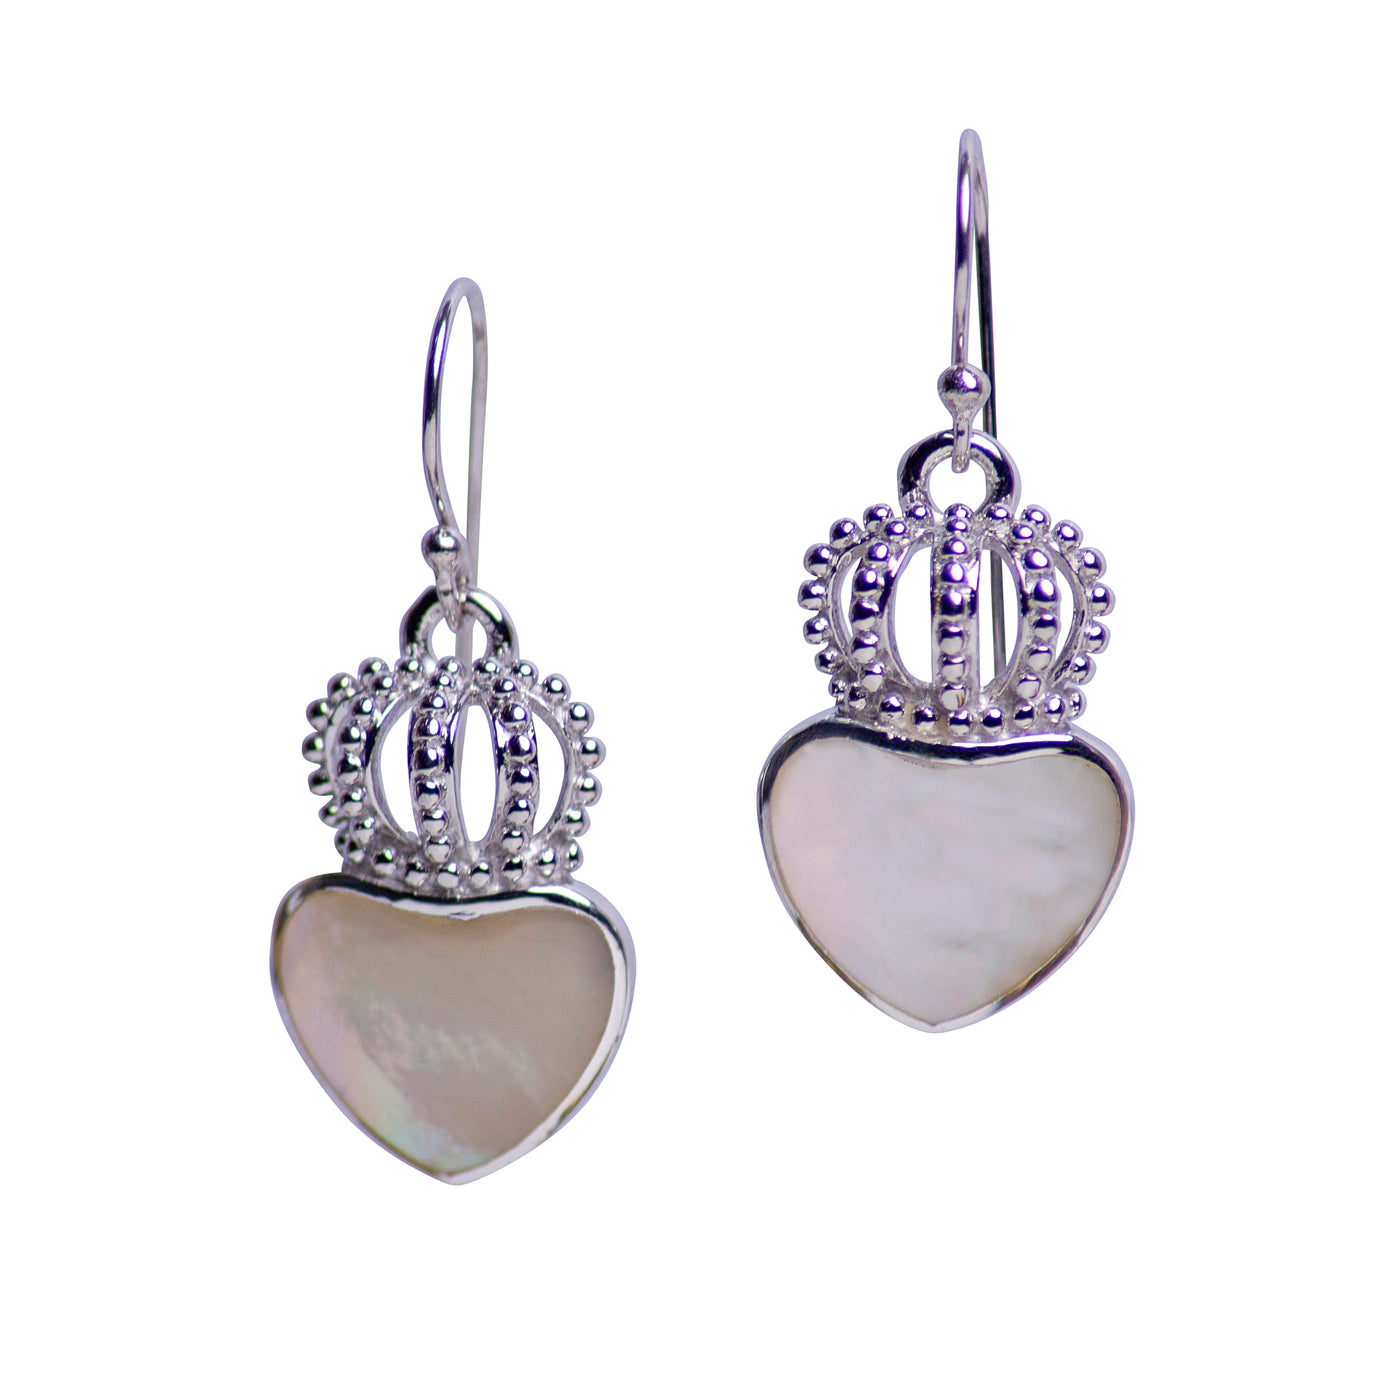 White Mother of Pearl Crown Silver Earrings